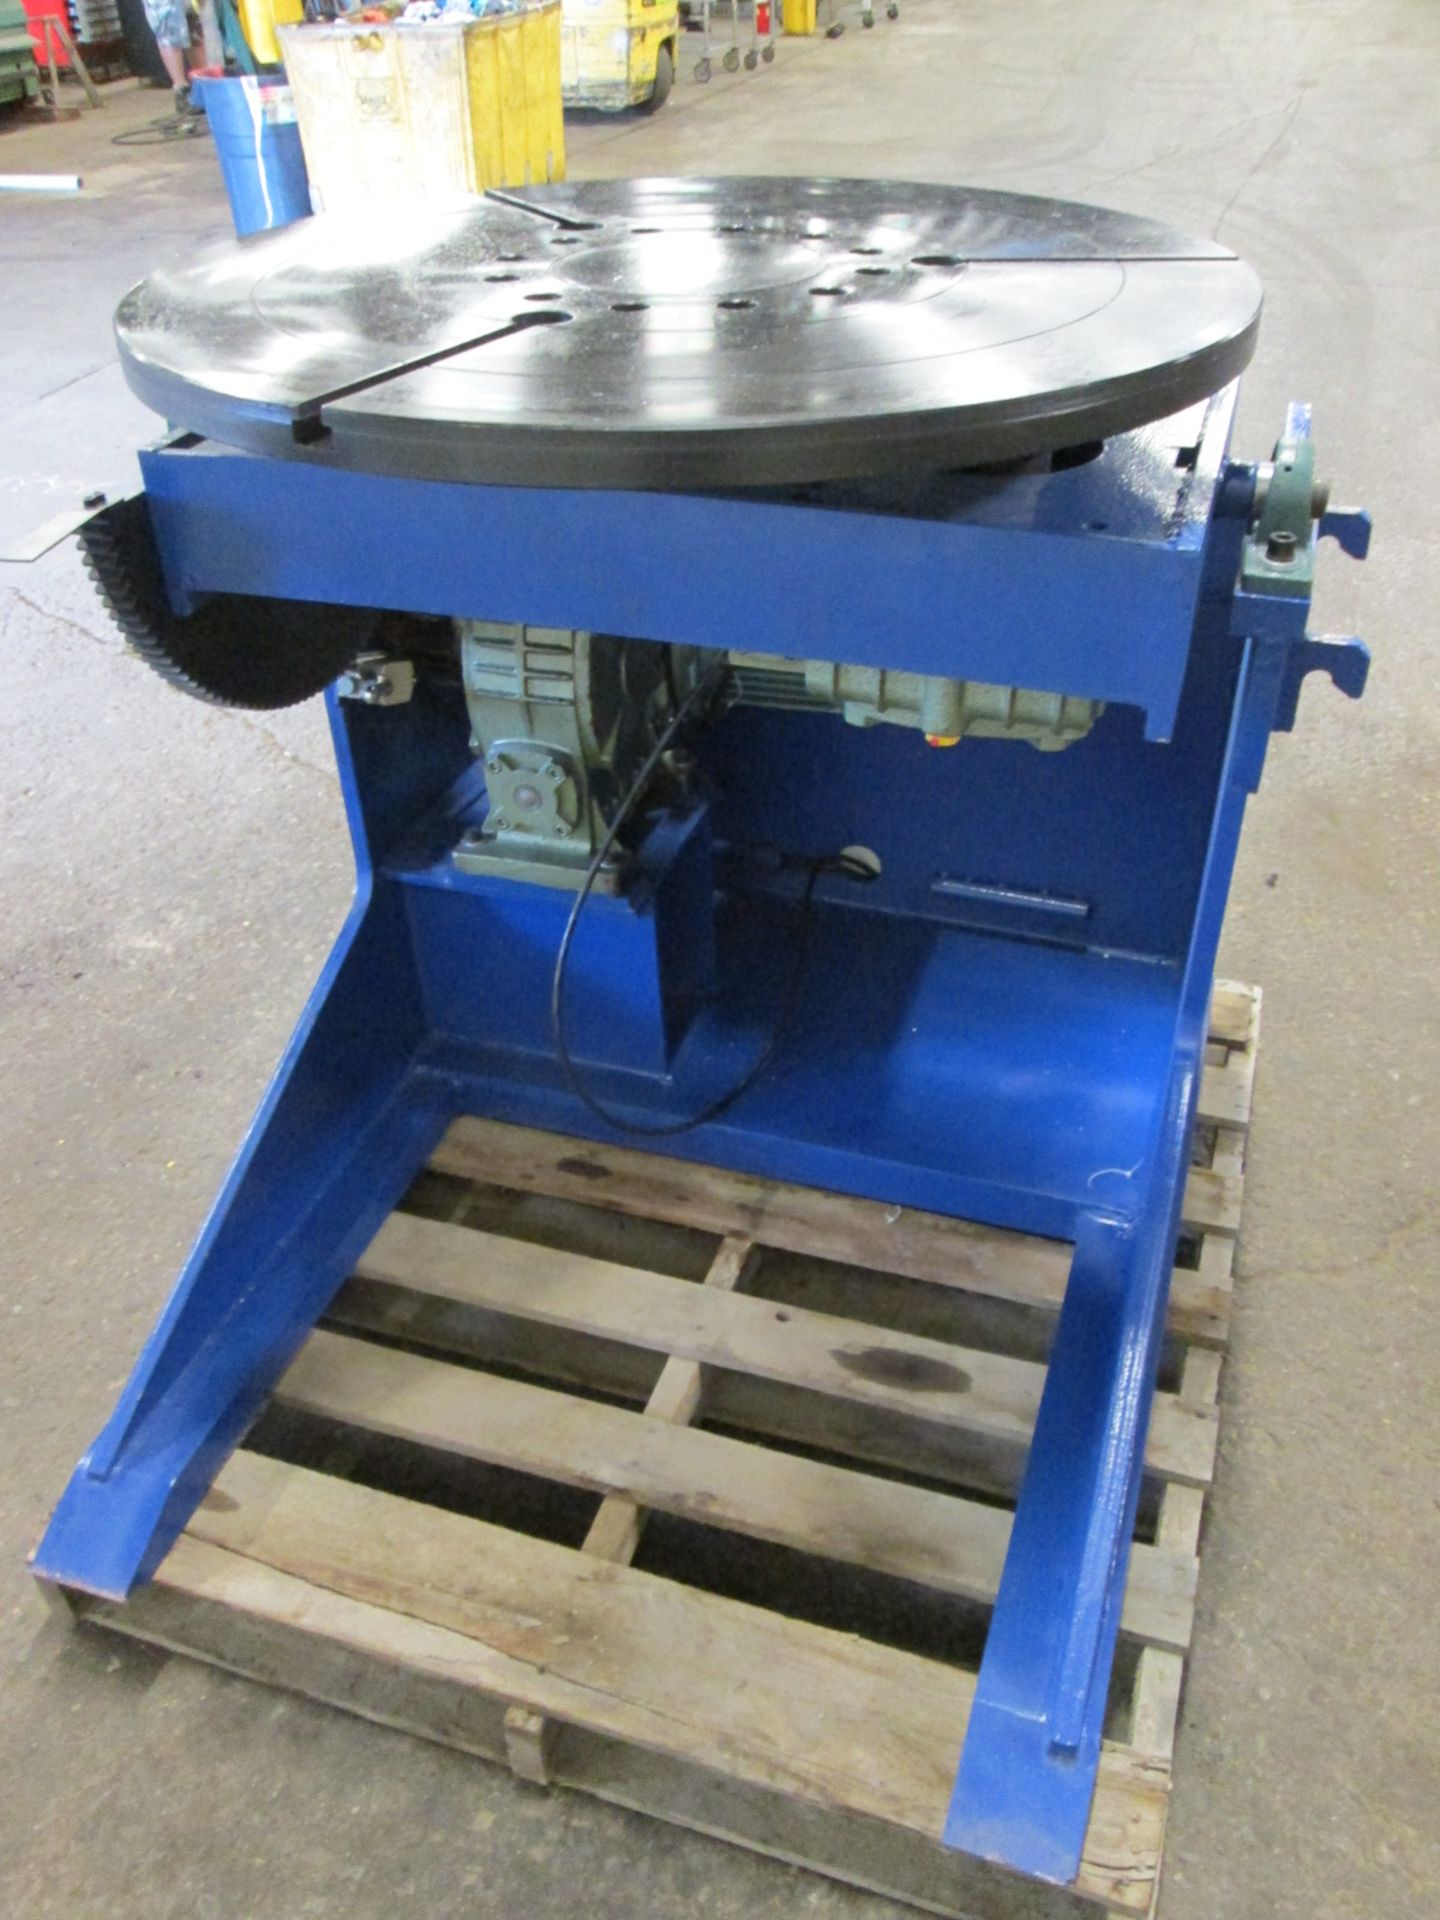 VD-2000 WELDING POSITIONER 2000lbs capacity - tilt and rotate with variable speed drive and teach